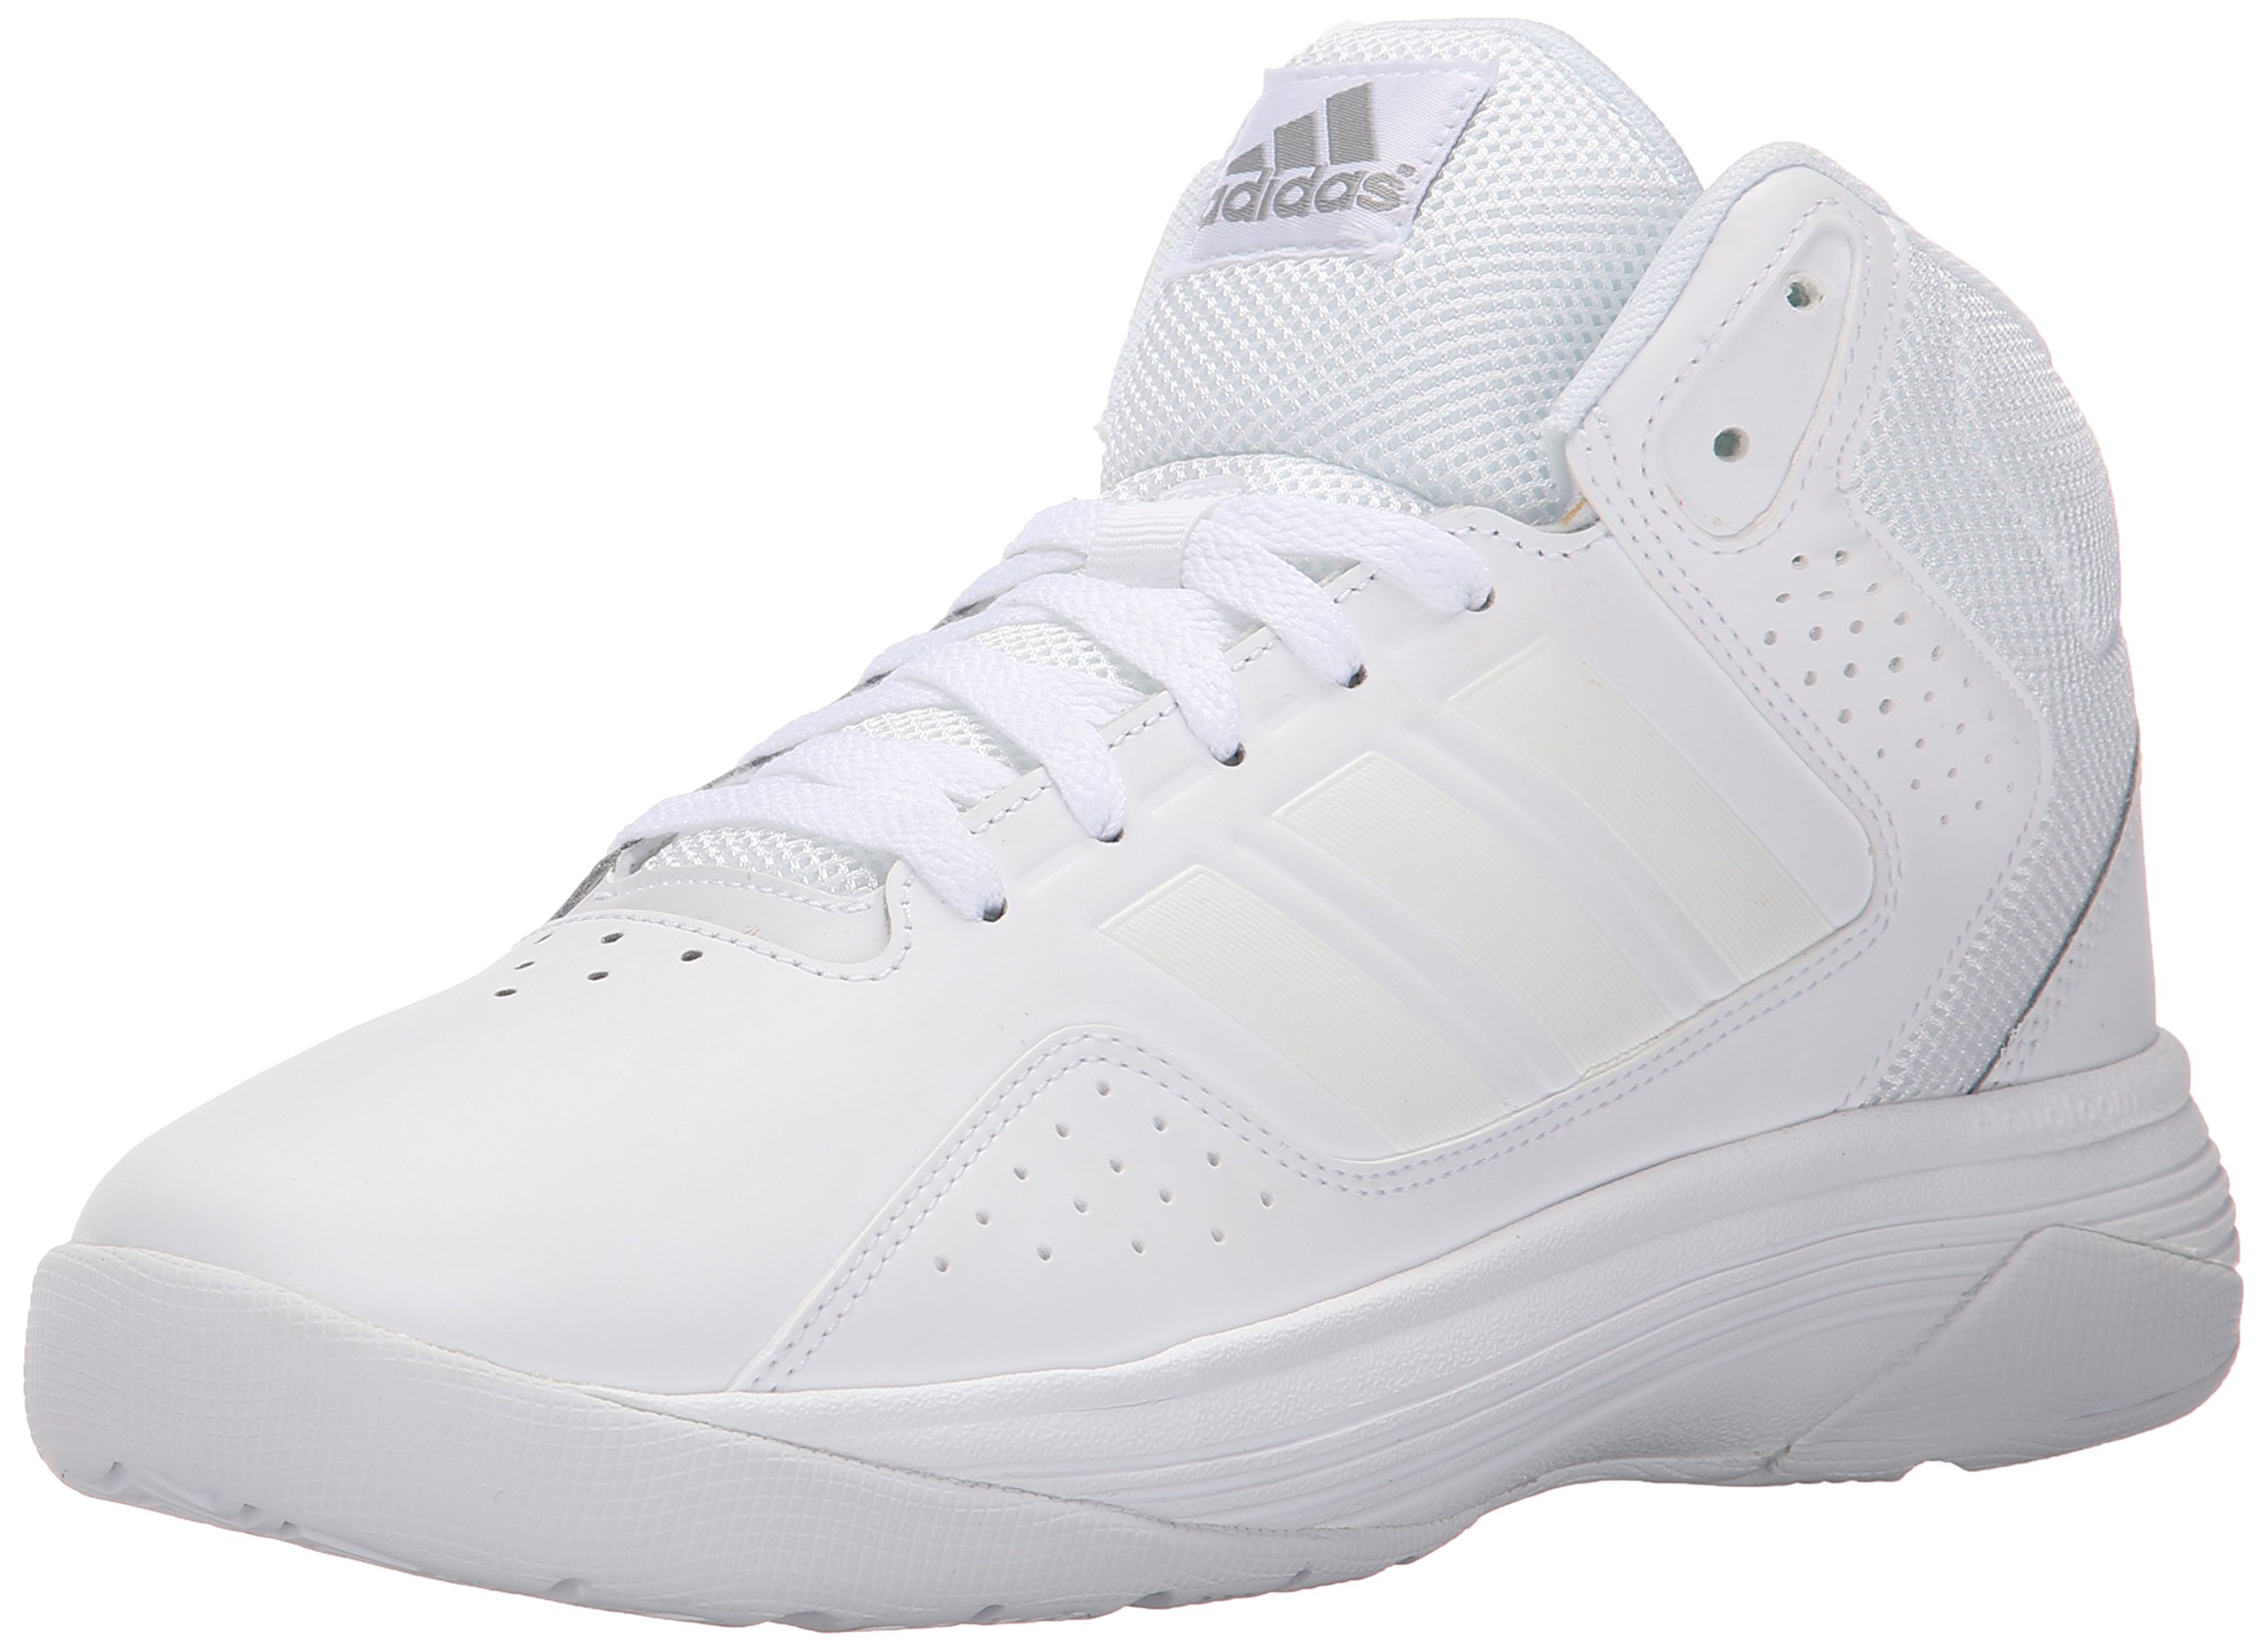 best performance basketball shoes 219